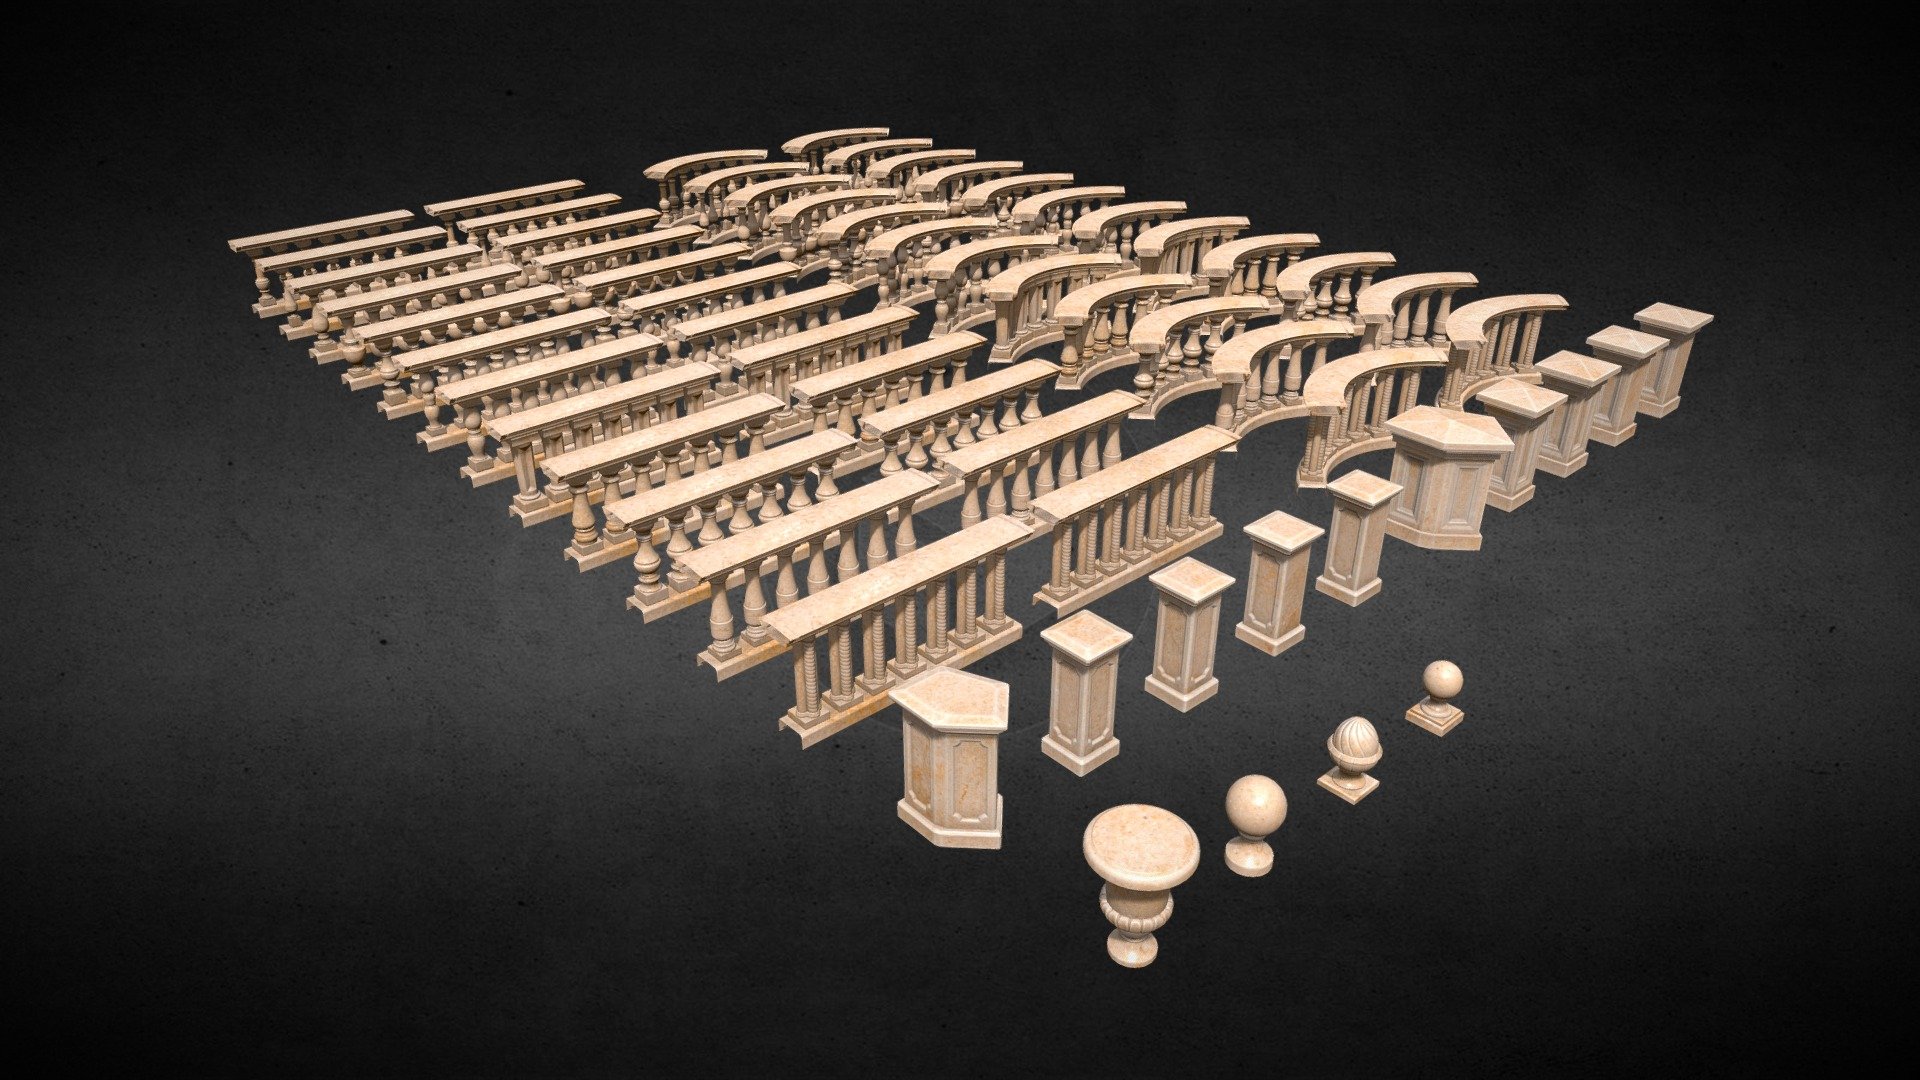 Balustrade Modular Pack created in lowpoly with 62 objects and two Texture-Sets (Stone &amp; Marble).

Package contains:



12 Rails with Balusters (Variation 1)

12 Rails with Balusters (Variation 2)

12 90° Curved-Rails with Balusters (Variation 1)

12 90° Curved-Rails with Balusters (Variation 2)

5 Pillars (Variation 1)

5 Pillars (Variation 2)

4 Tops (only for Pillars V1)



Topology: 468716 Tris



PBR Textures:

3x BaseColor (4k)

3x Metallic (4k)

3x Roughness (4k)

3x Normal (4k)

3x Ambient Occlusion (4k)



Mesh: .fbx Format

Textures: .png Format




download only &ldquo;Additional file